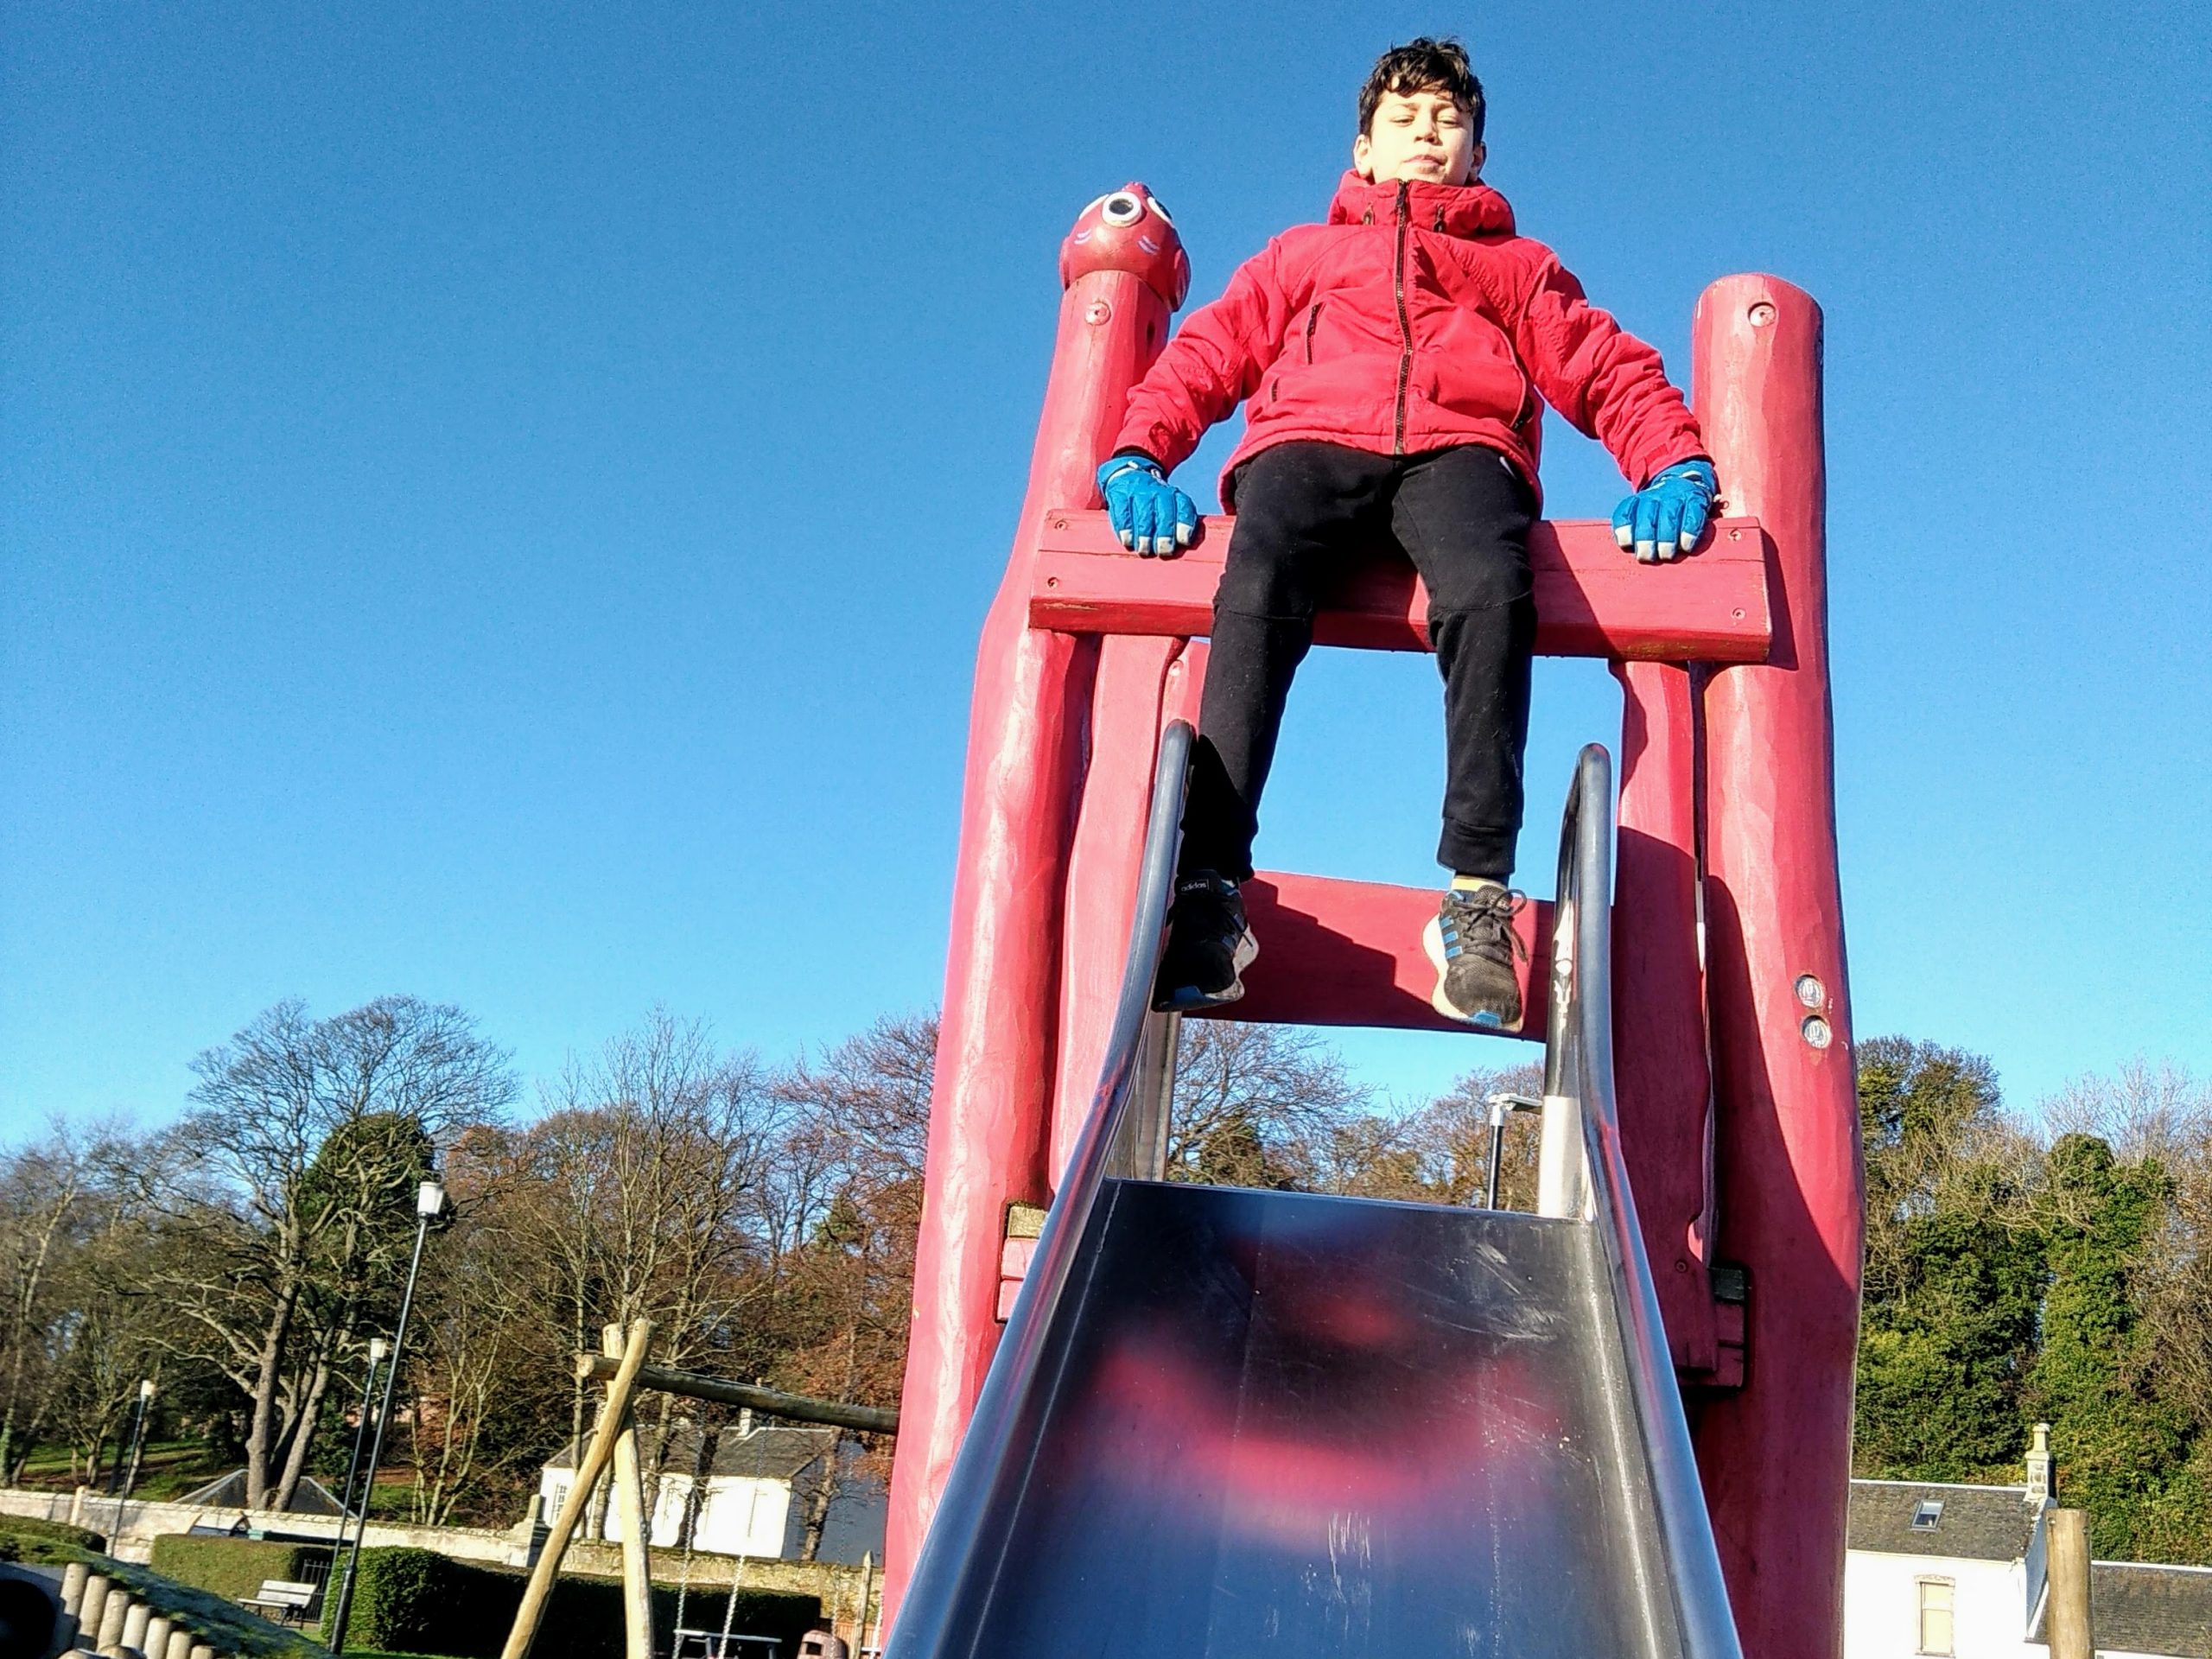 The Physics of a Playground Slide